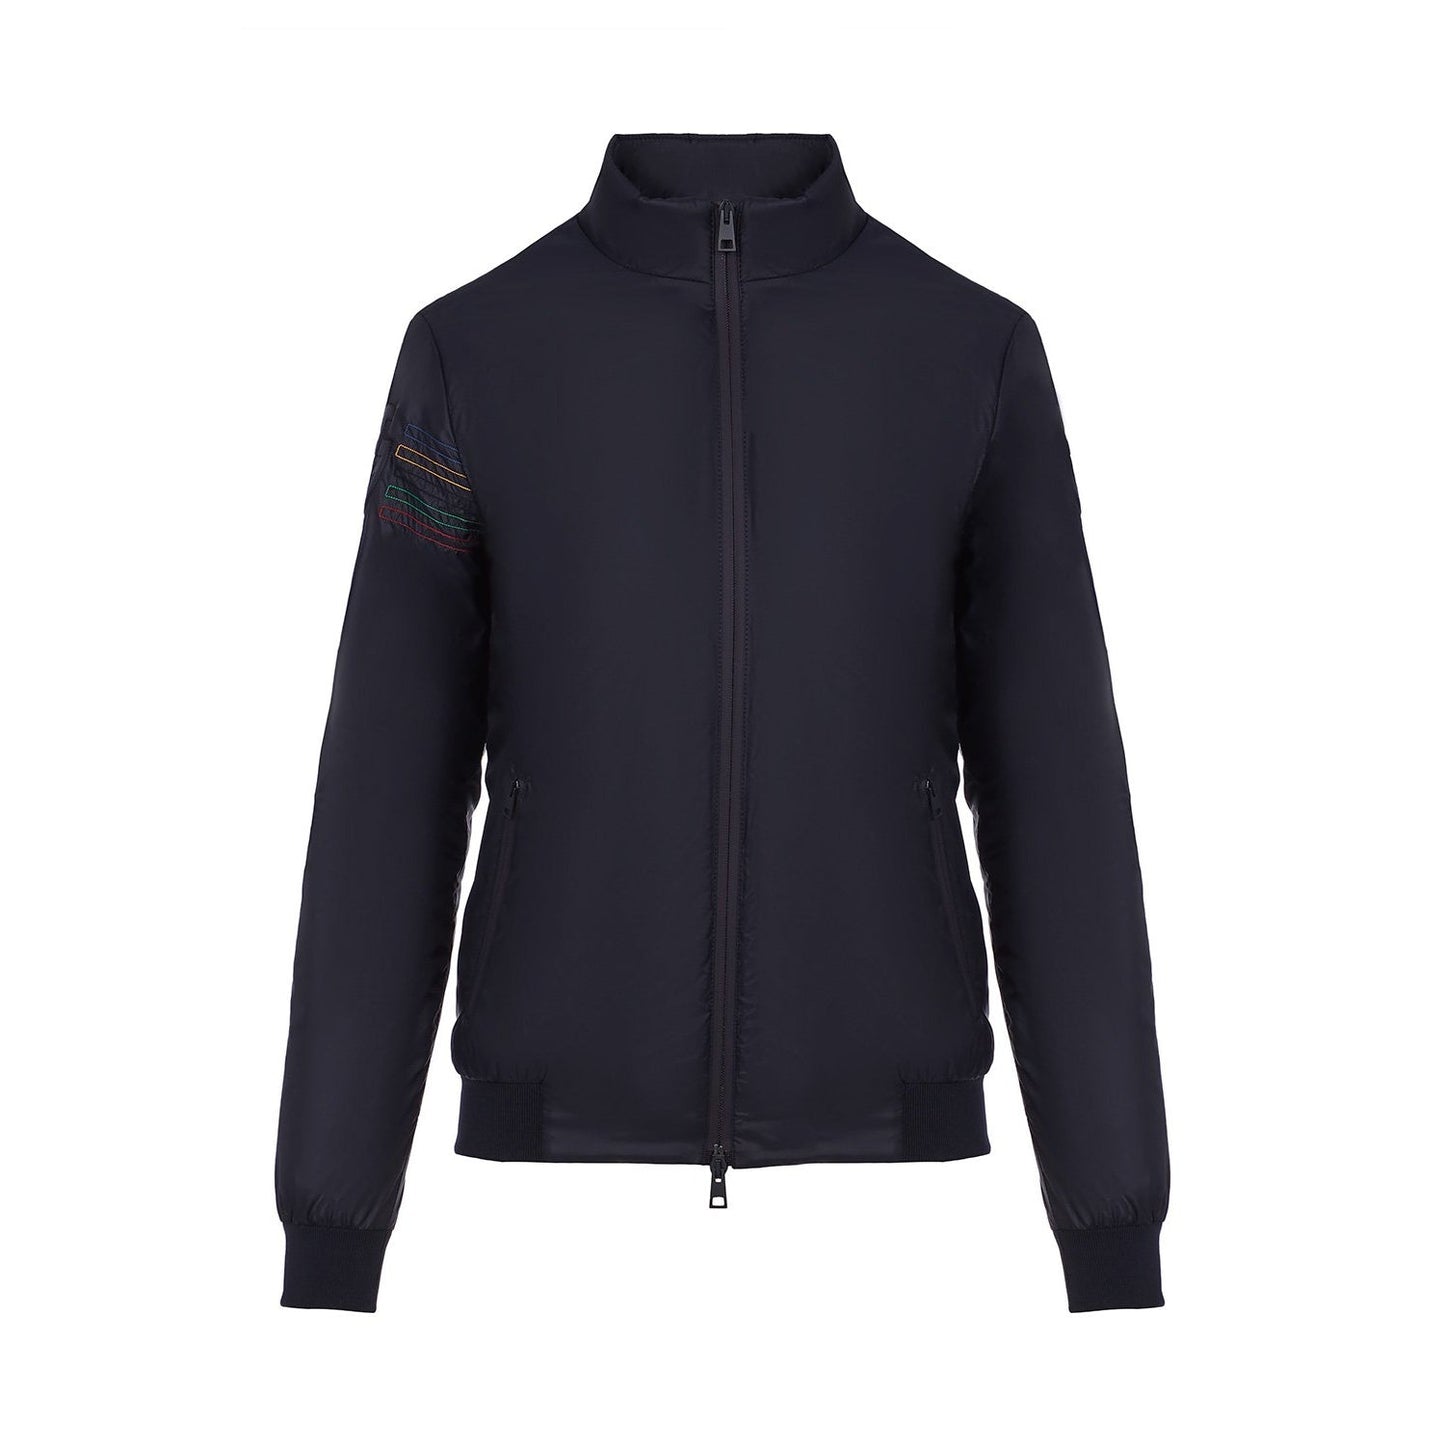 Cavalleria Toscana Tokyo 2020 Zip Jacket-Trailrace Equestrian Outfitters-The Equestrian